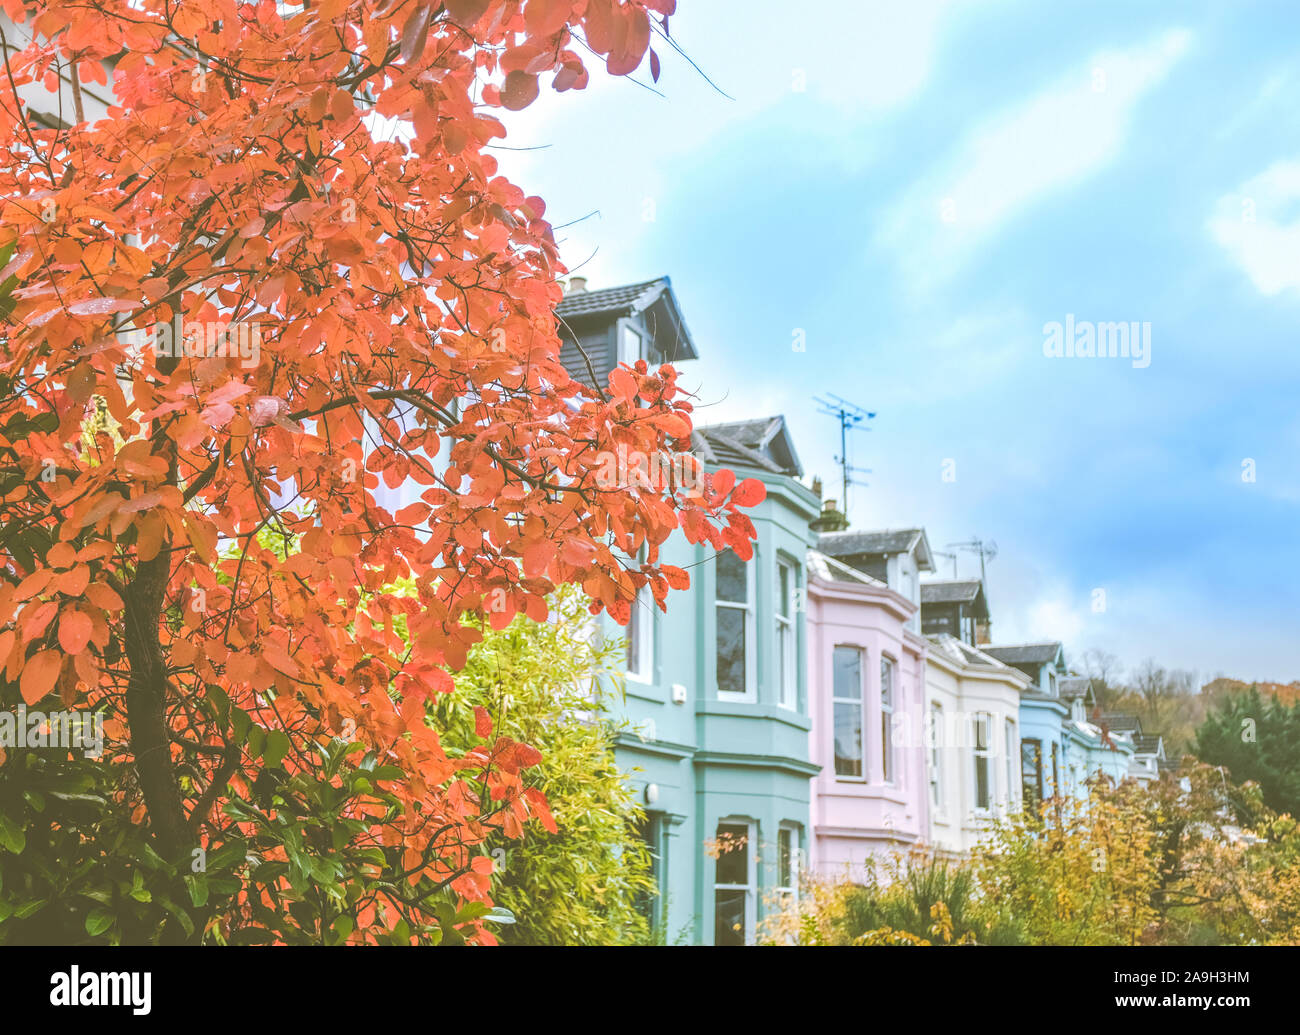 A Beautiful Colourful Terrace Street In A British City (Glasgow) In The Autumn (Fall) Stock Photo